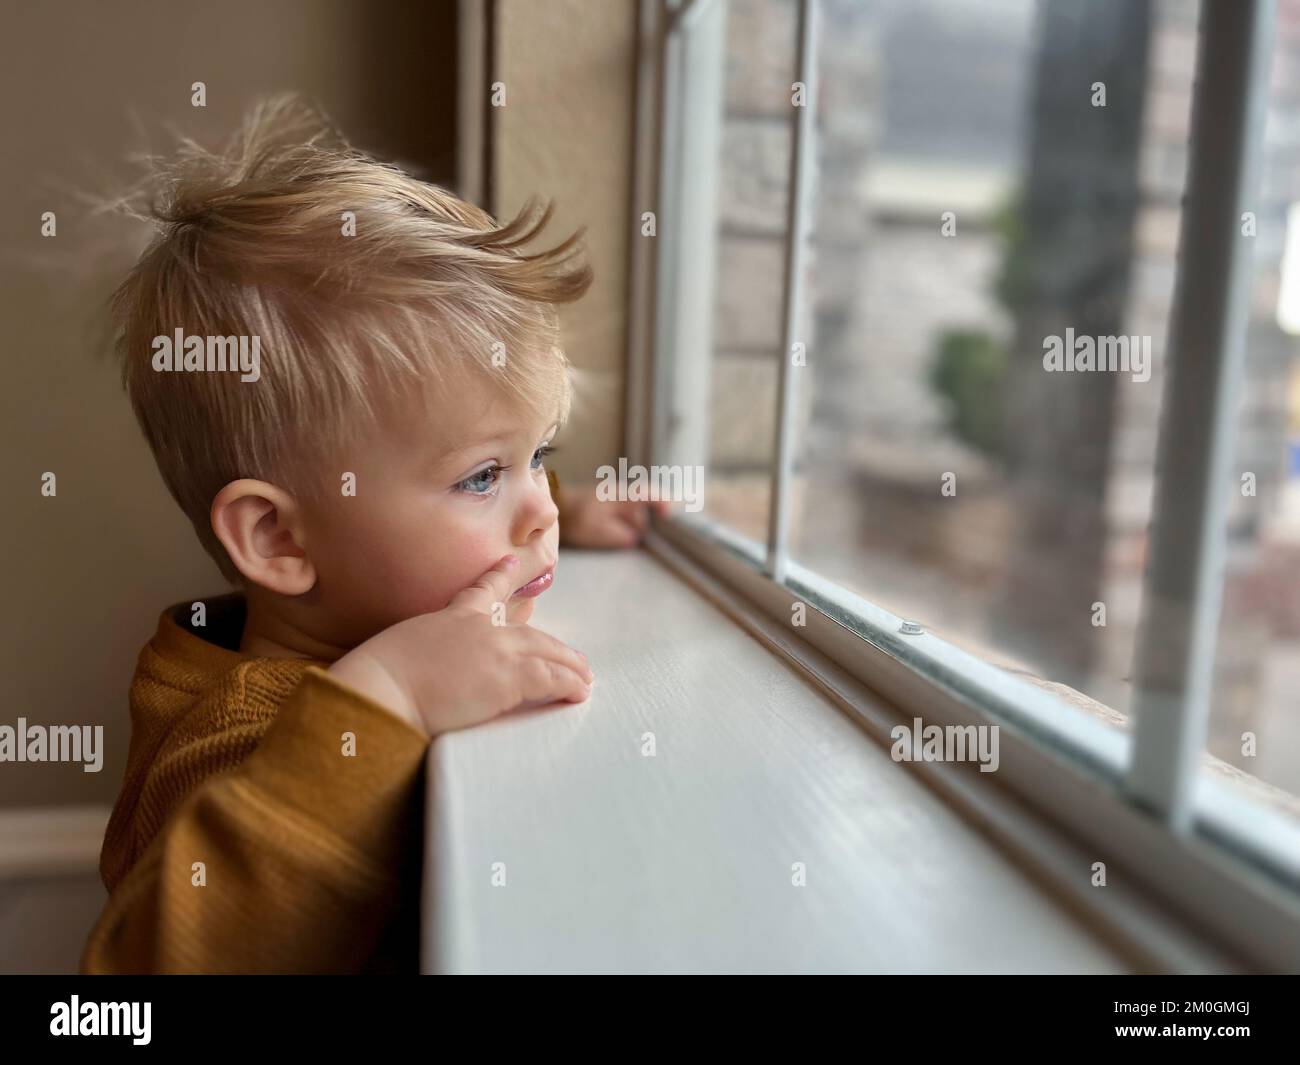 Cute little toddler looking at the window at home, close up portrait  Stock Photo